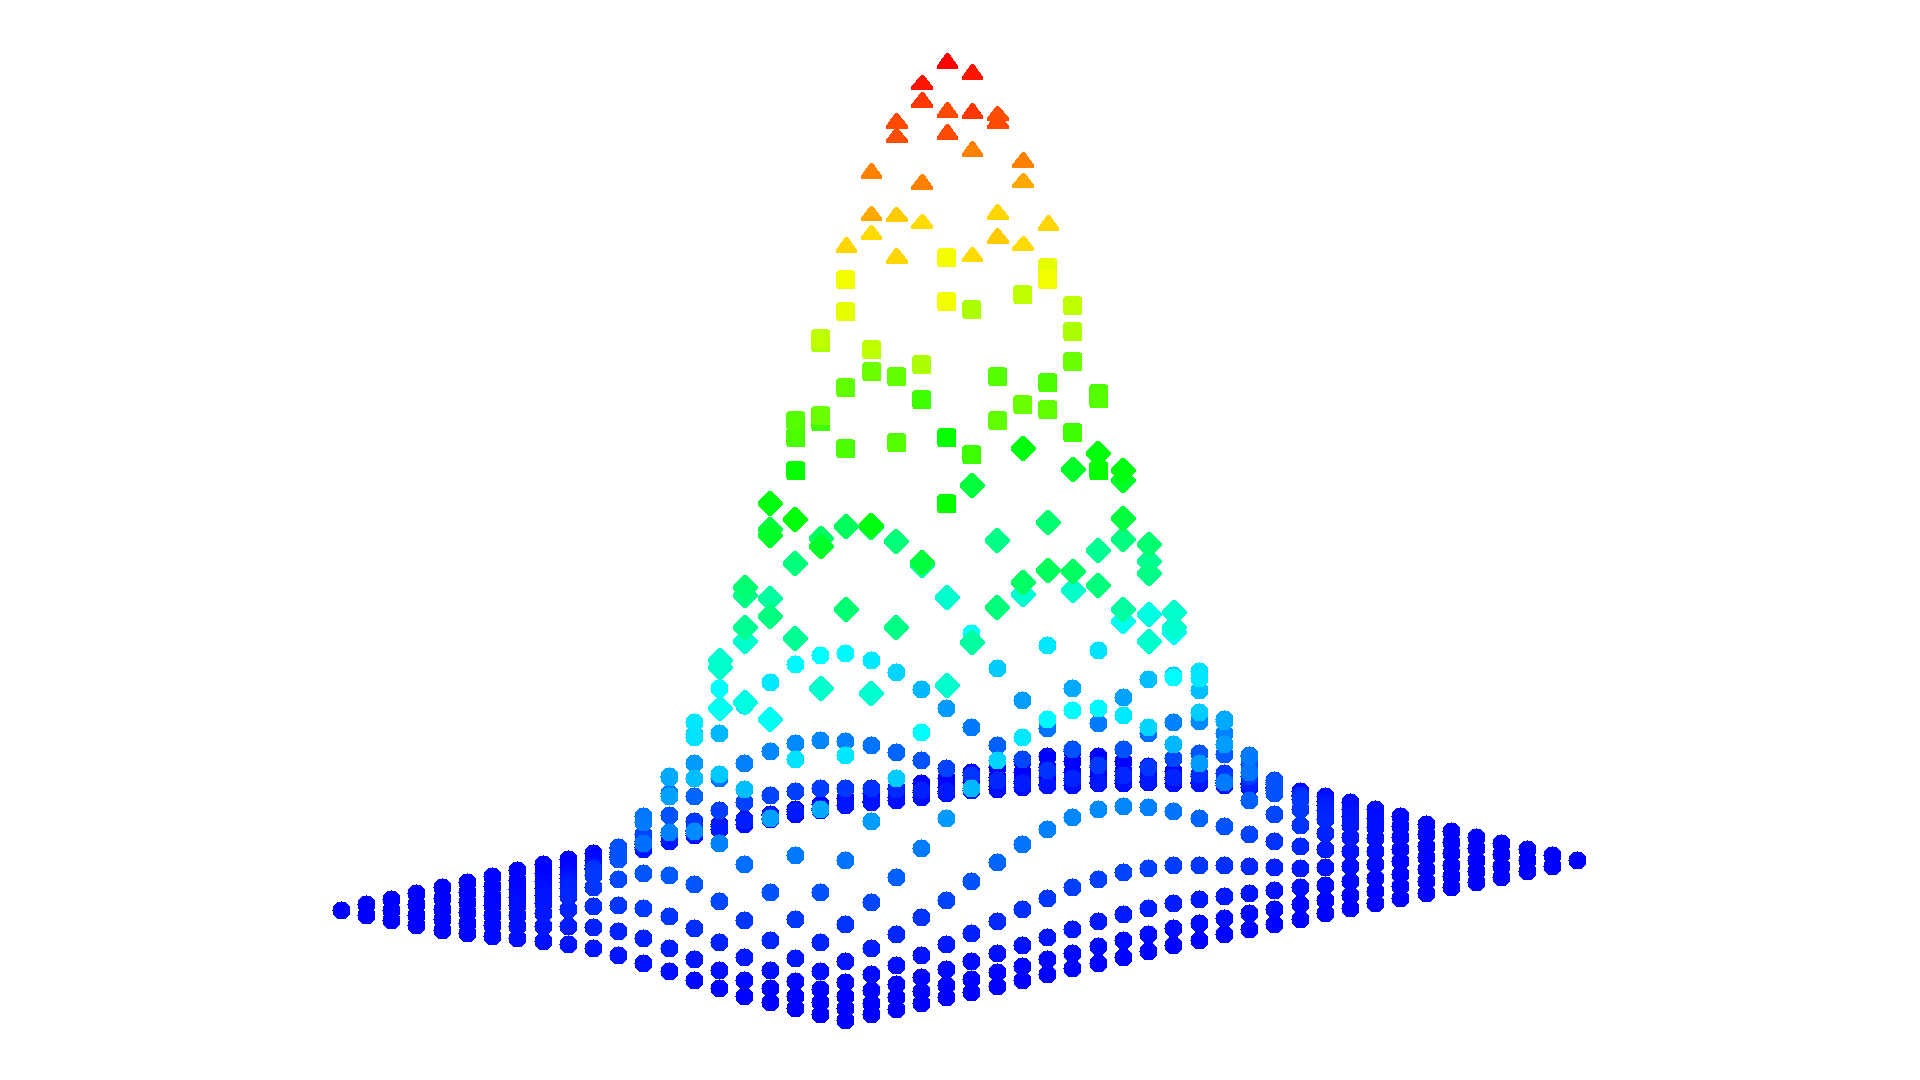 Example 7: Five-colored 3D-Plot with changing markers